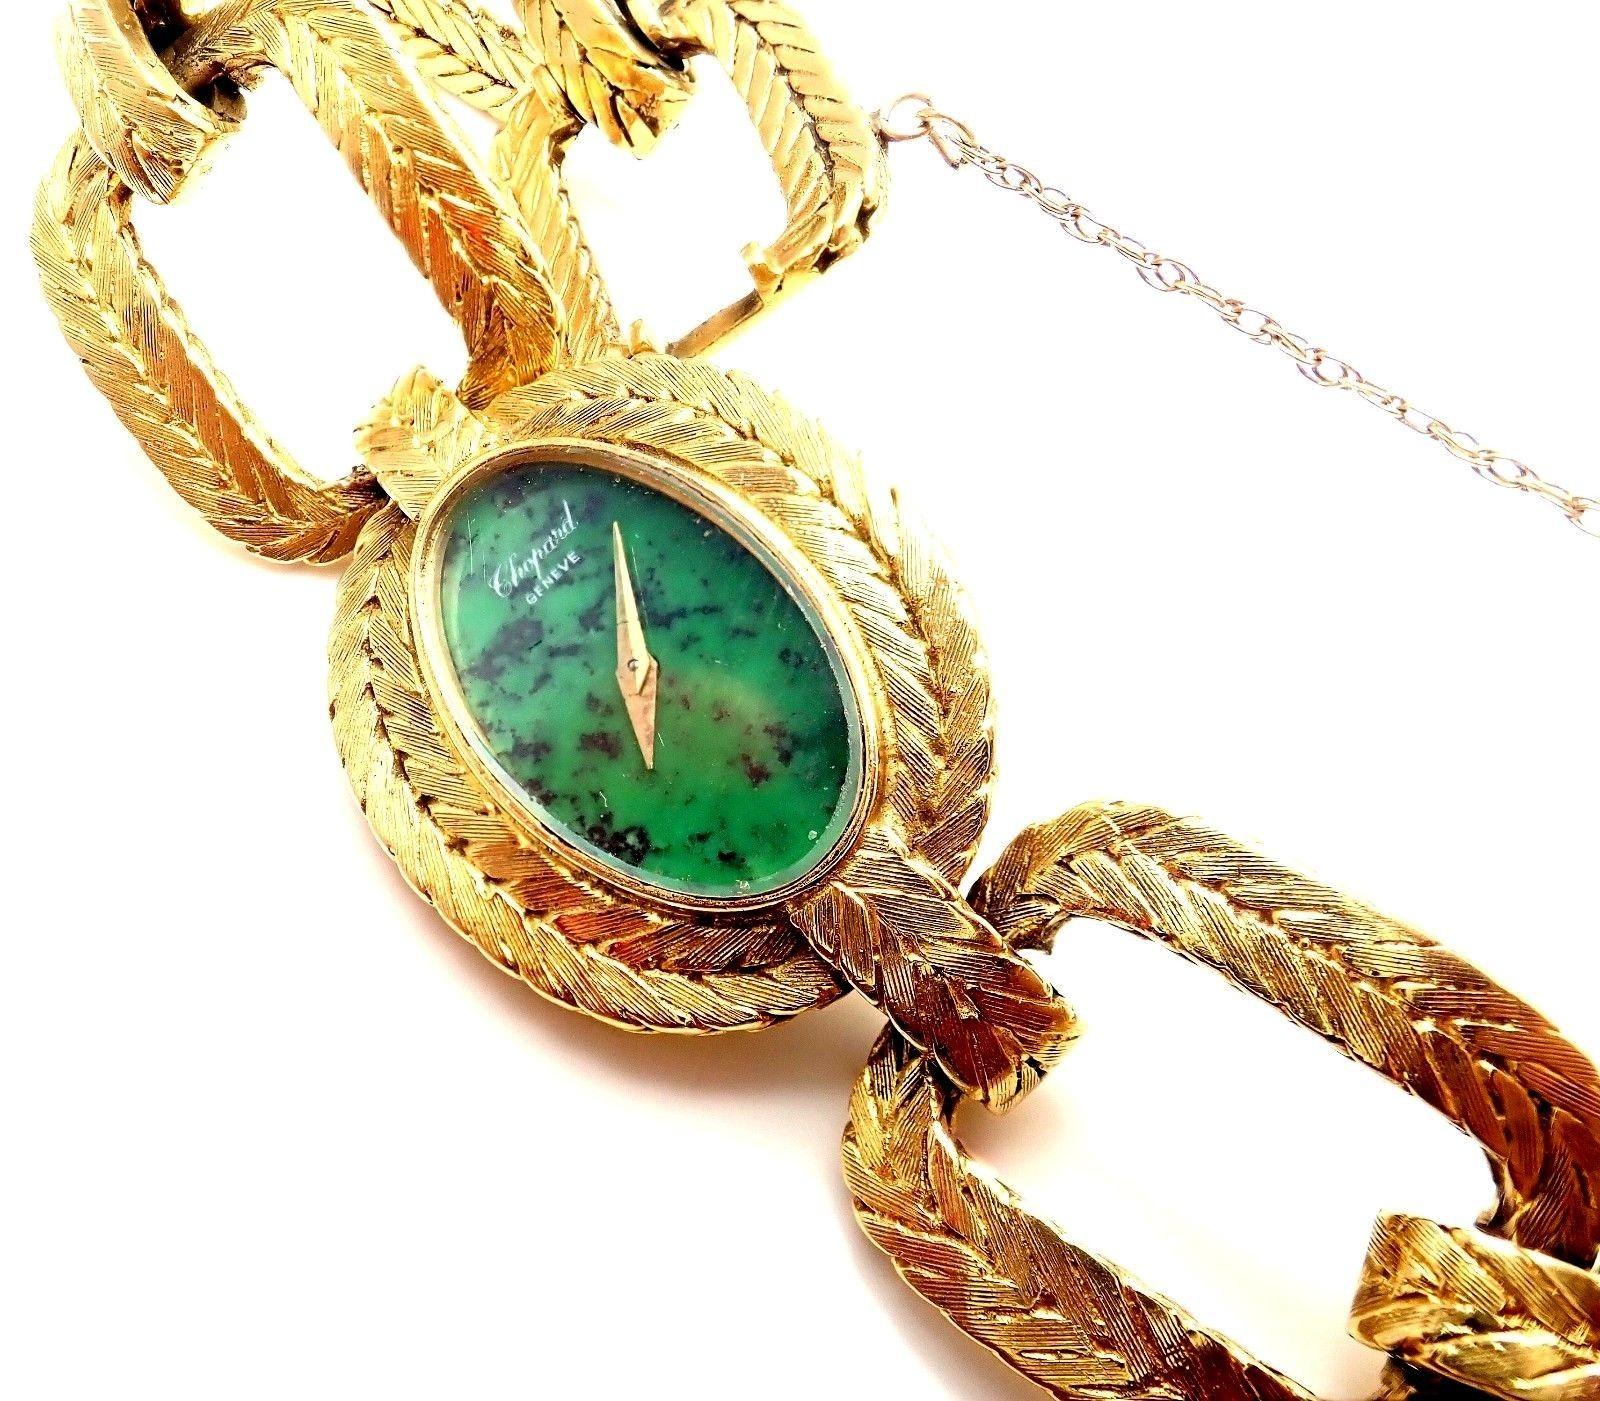 18k Yellow Gold Malachite Dial Manual Wind Vintage Watch by Chopard. 
Details: 
Case Dimensions: 22mm x 38mm
Watch Length: 8